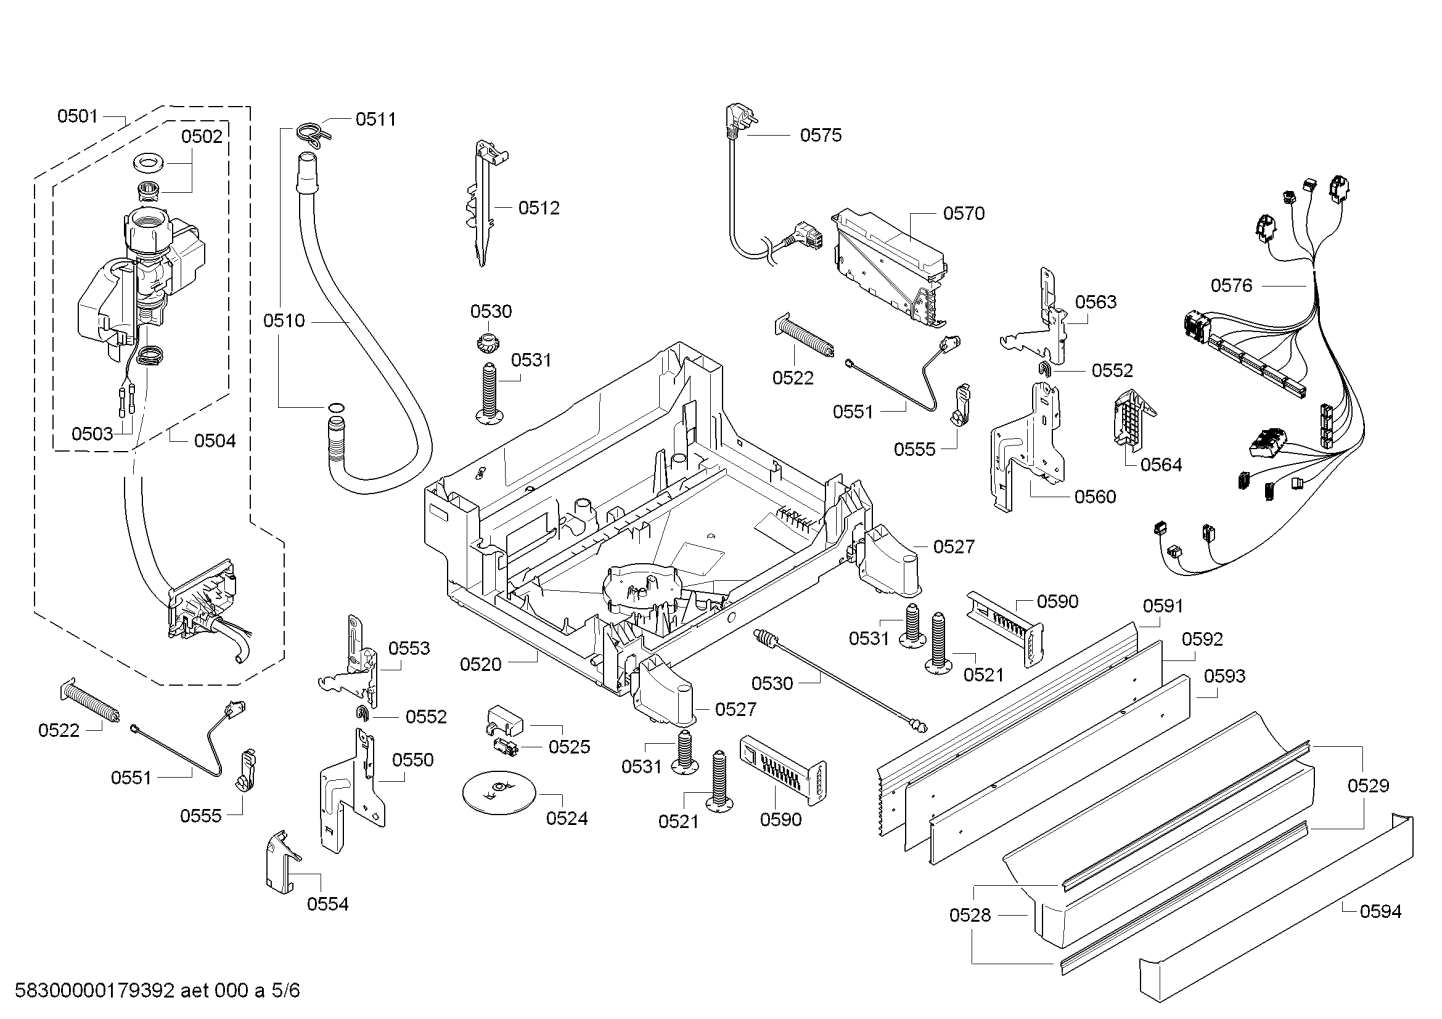 drawing_link_5_device_1734510